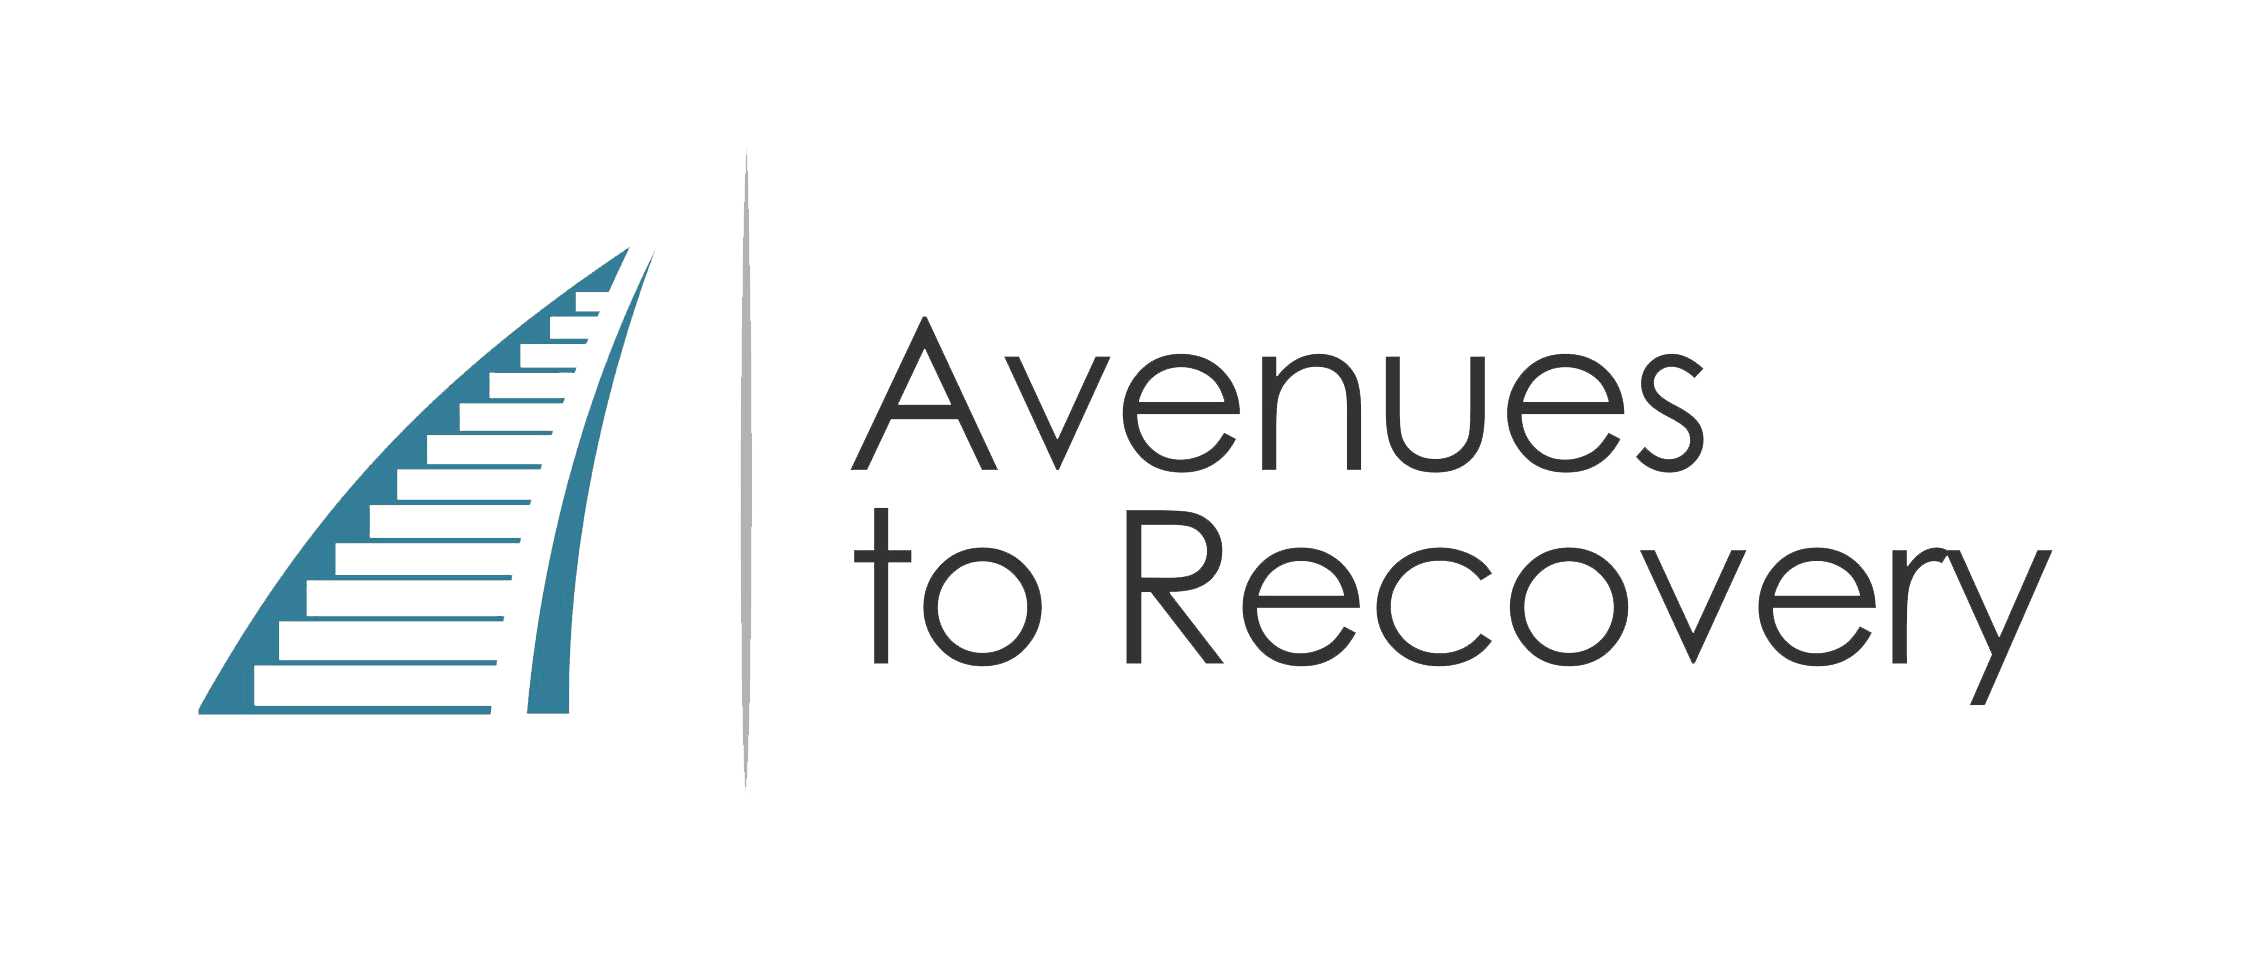 Avenues to Recovery